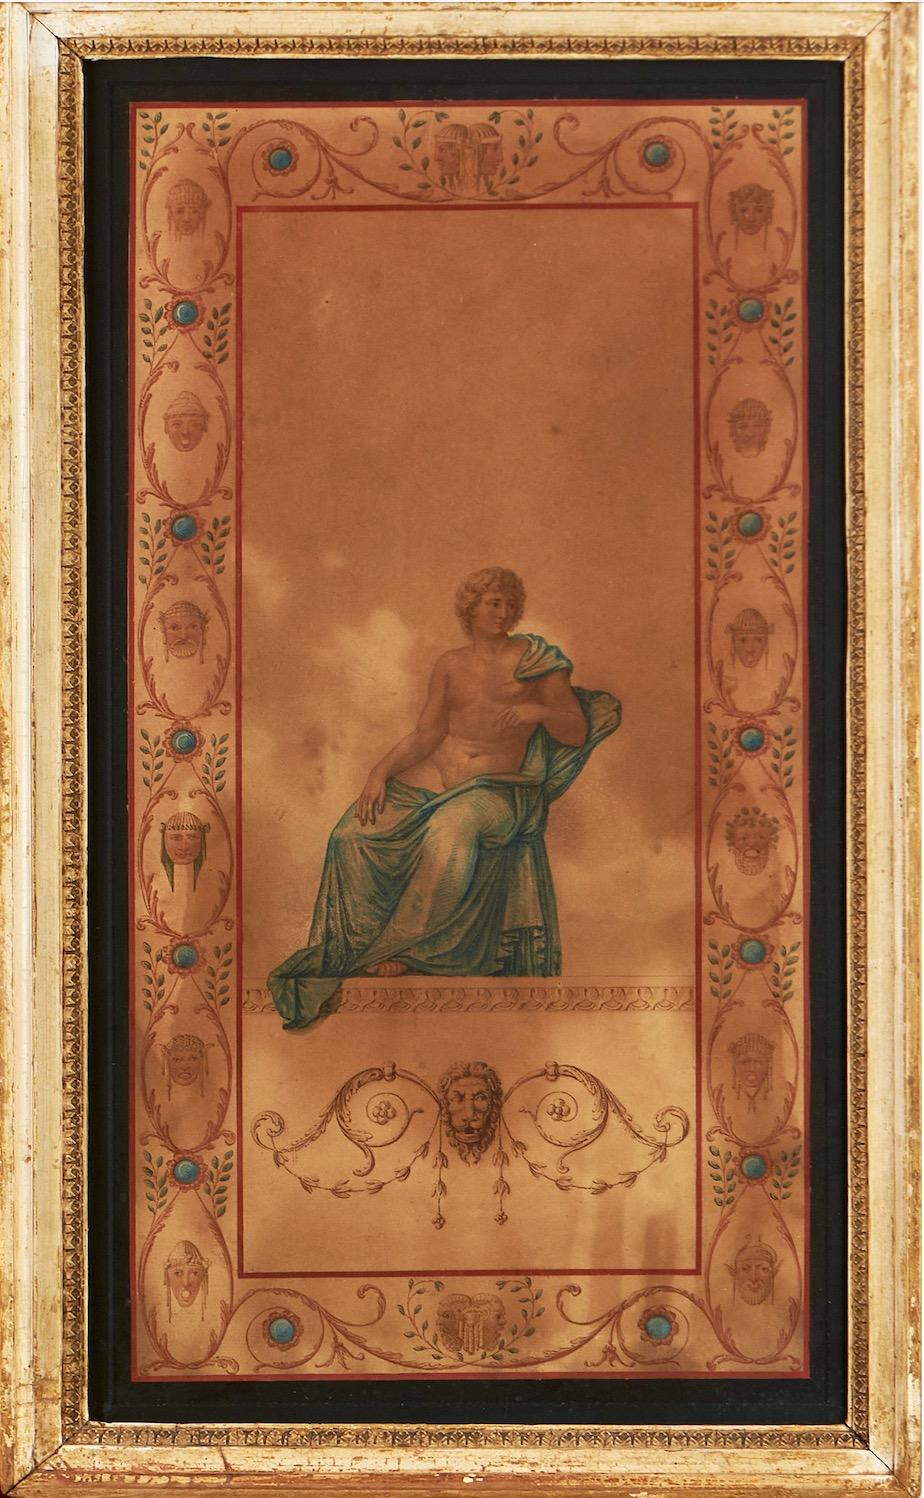 A pair of Swedish watercolors from the late gustavian or early empire period painted in neoclassical or pompeian style. Period and probably original frames. The watercolors have been discolored by the sun and time and have a brownish color to the